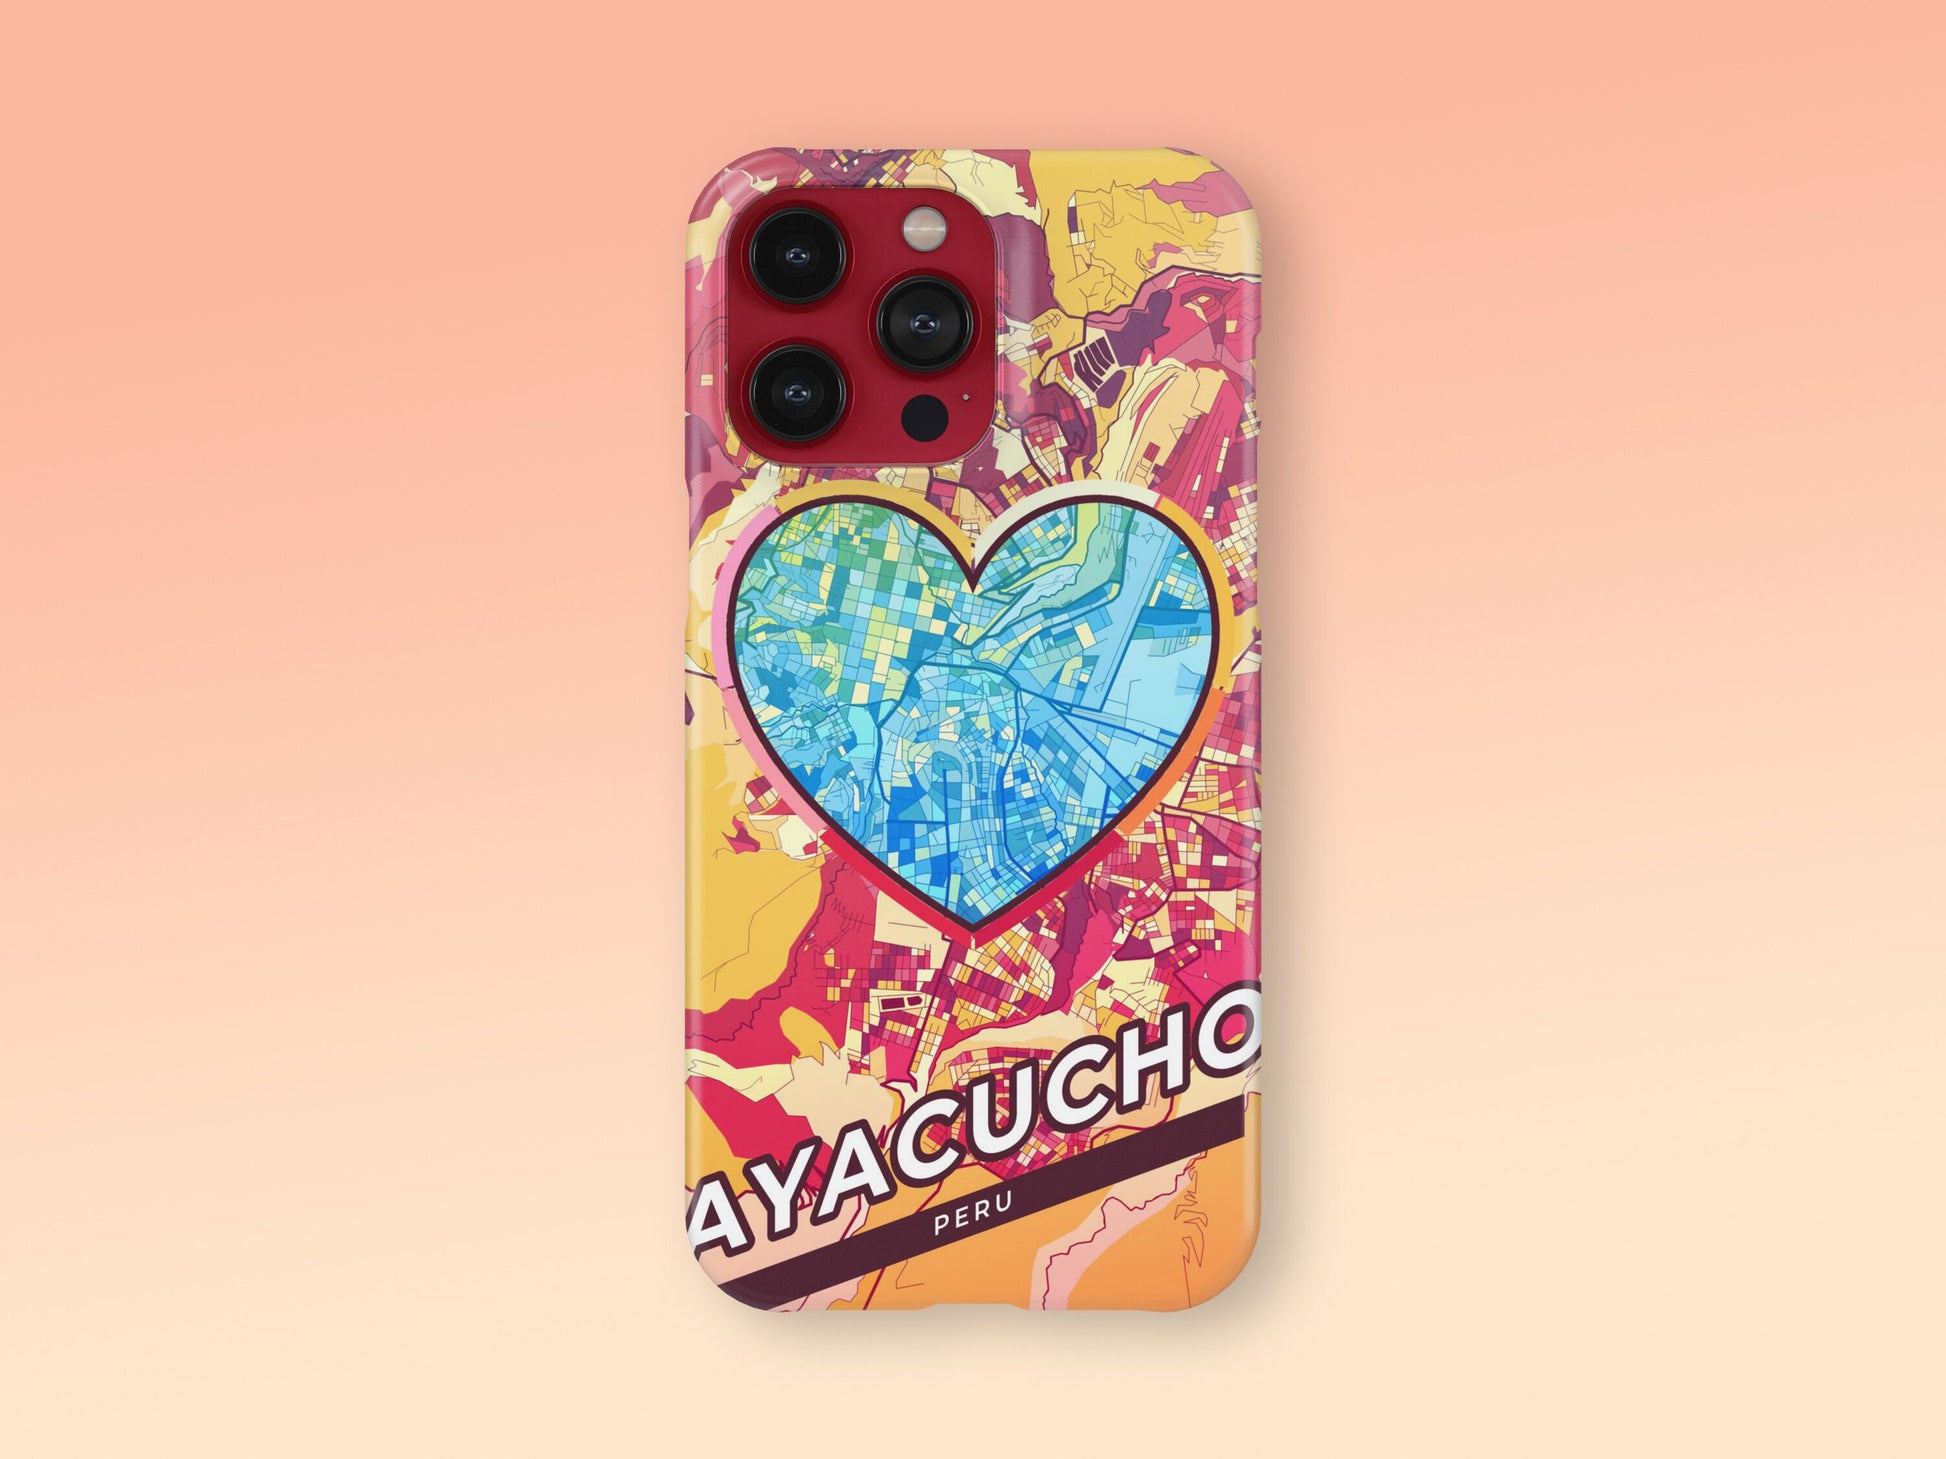 Ayacucho Peru slim phone case with colorful icon. Birthday, wedding or housewarming gift. Couple match cases. 2